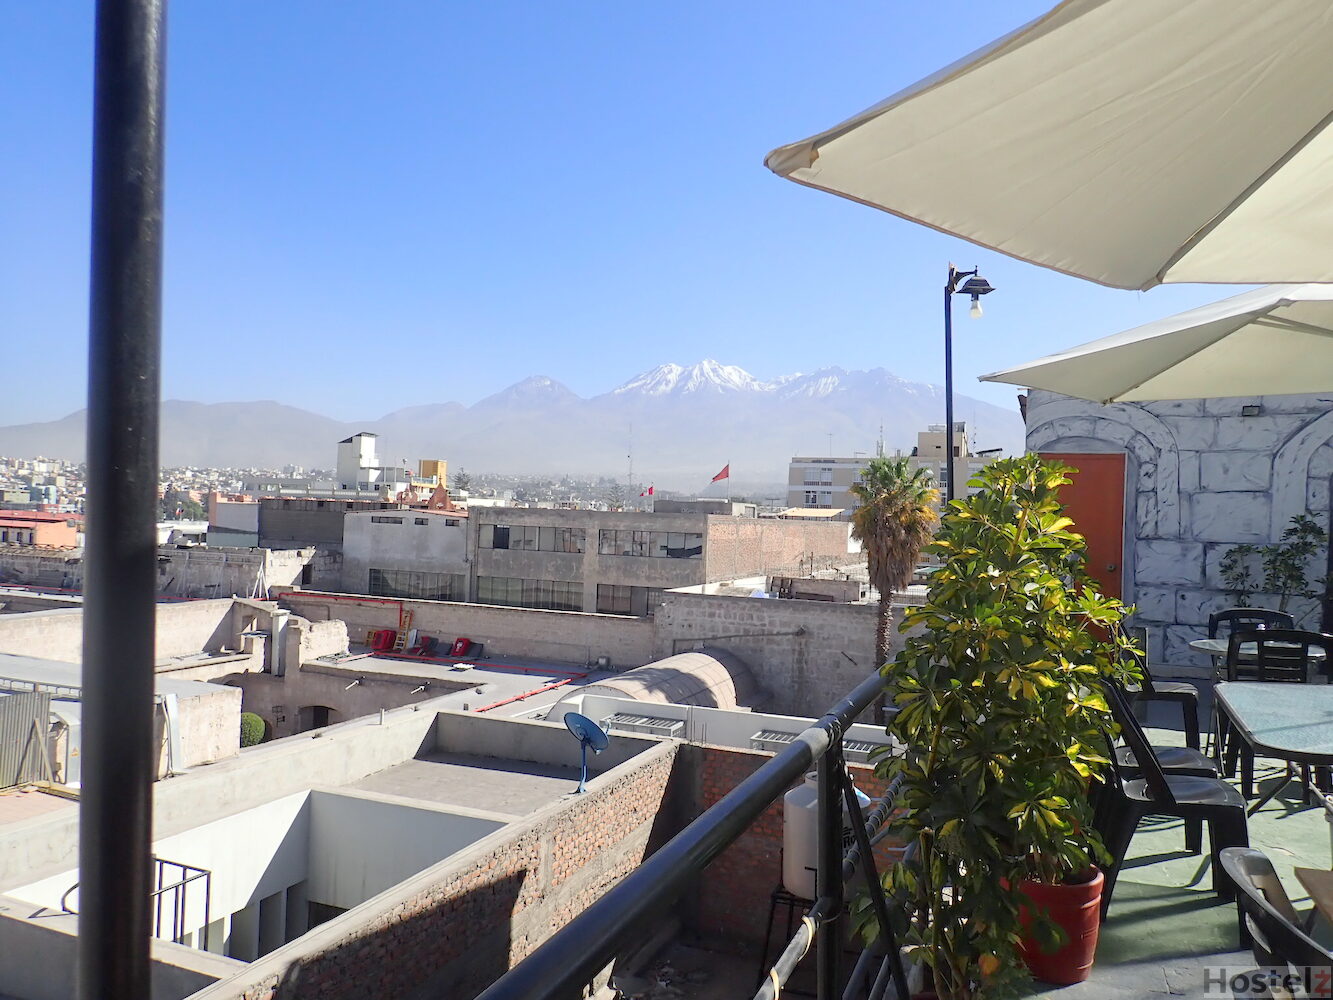 Rooftop views over the city and snow capped mountains/ volcano